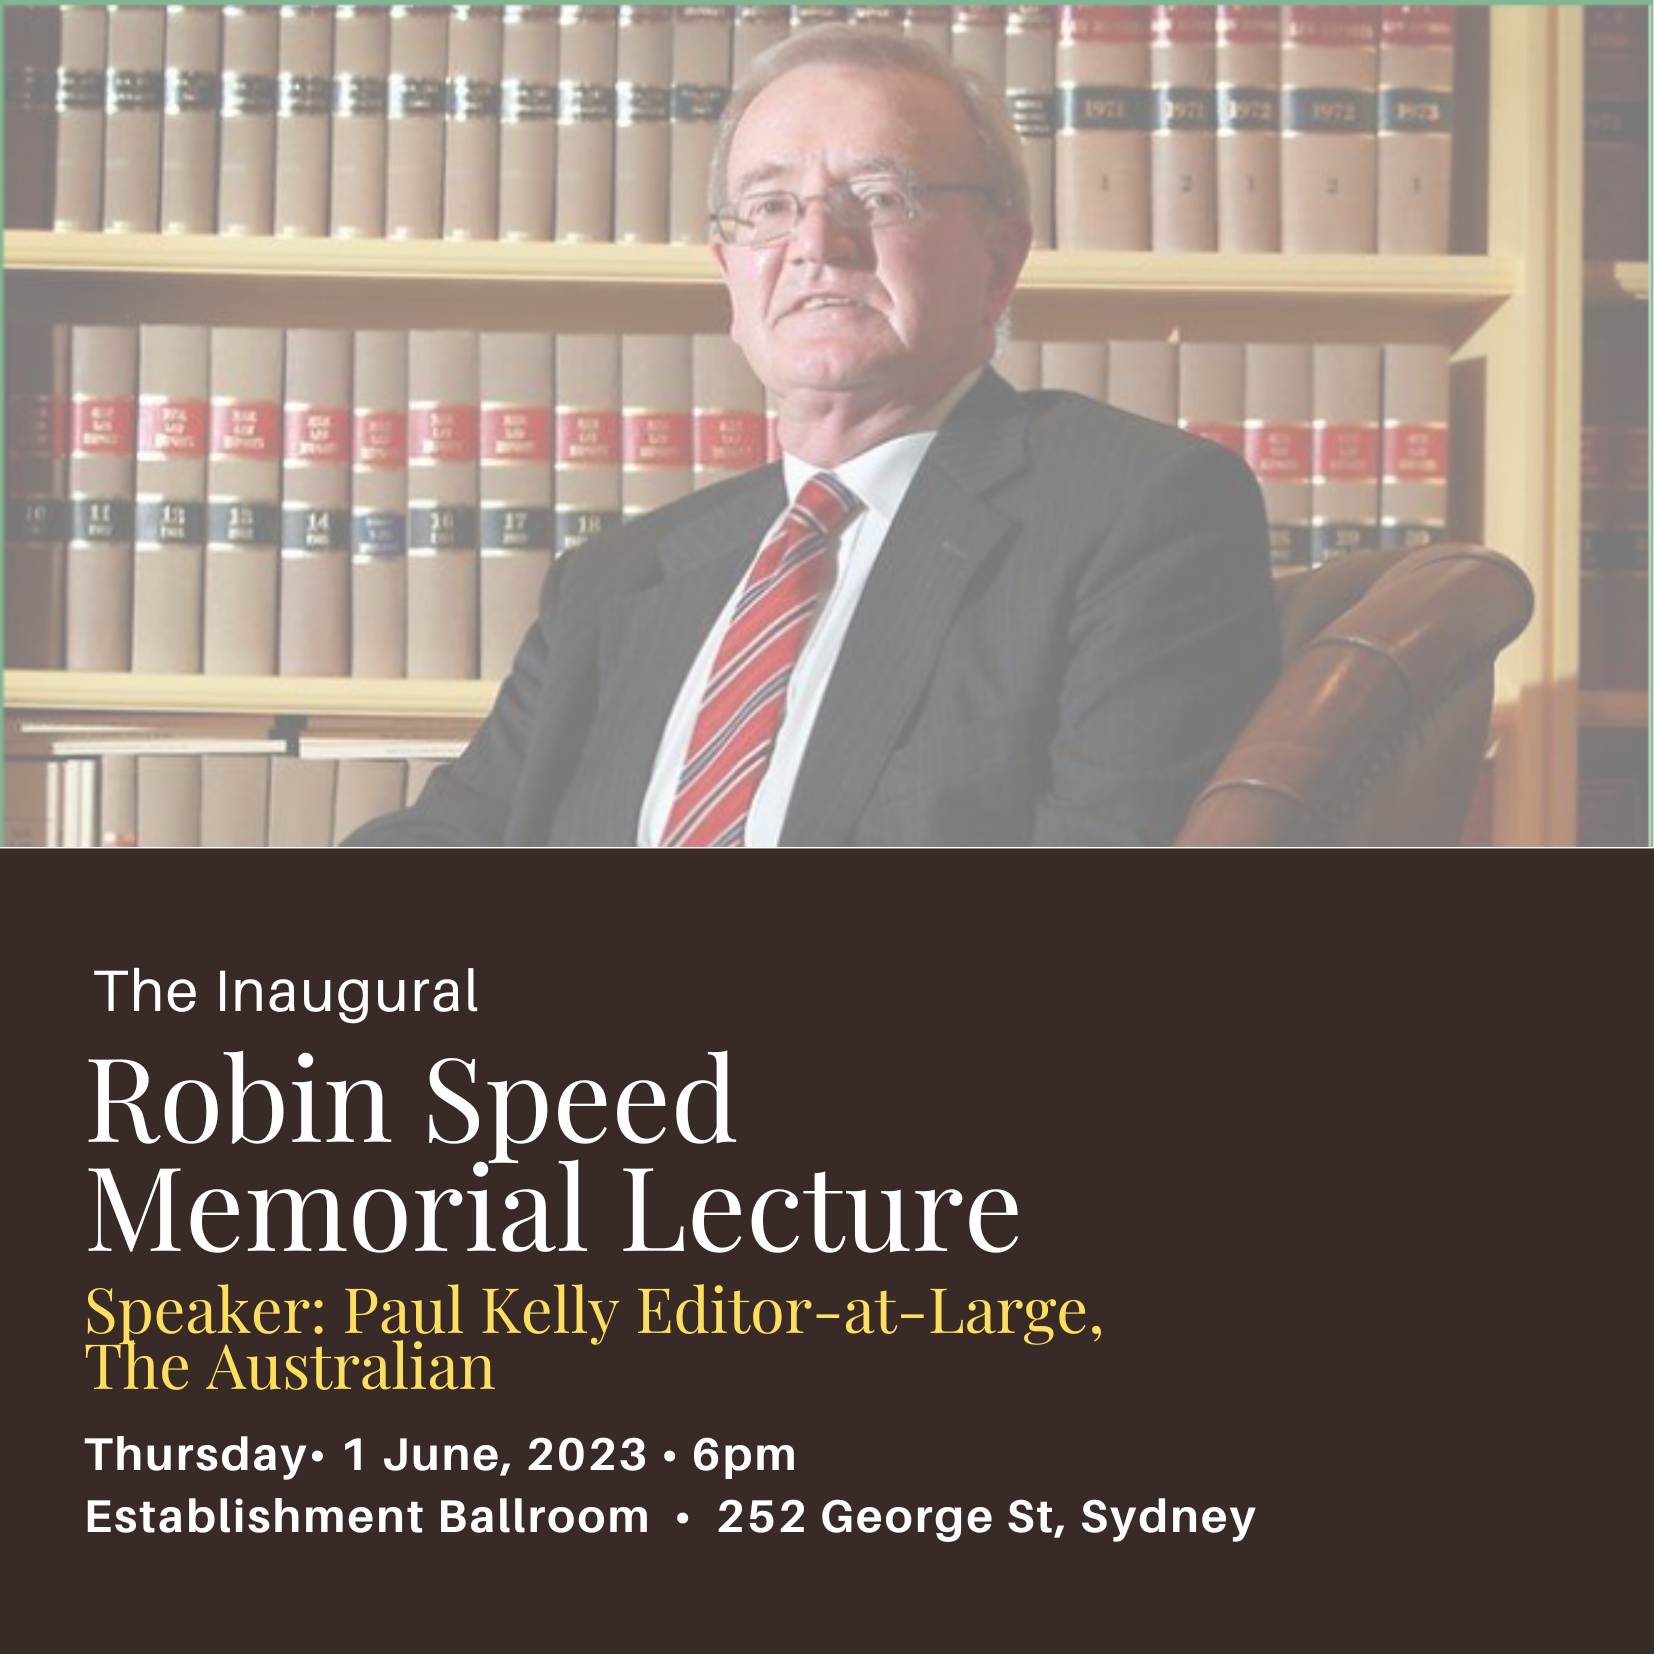 Robin Speed Memorial Lecture